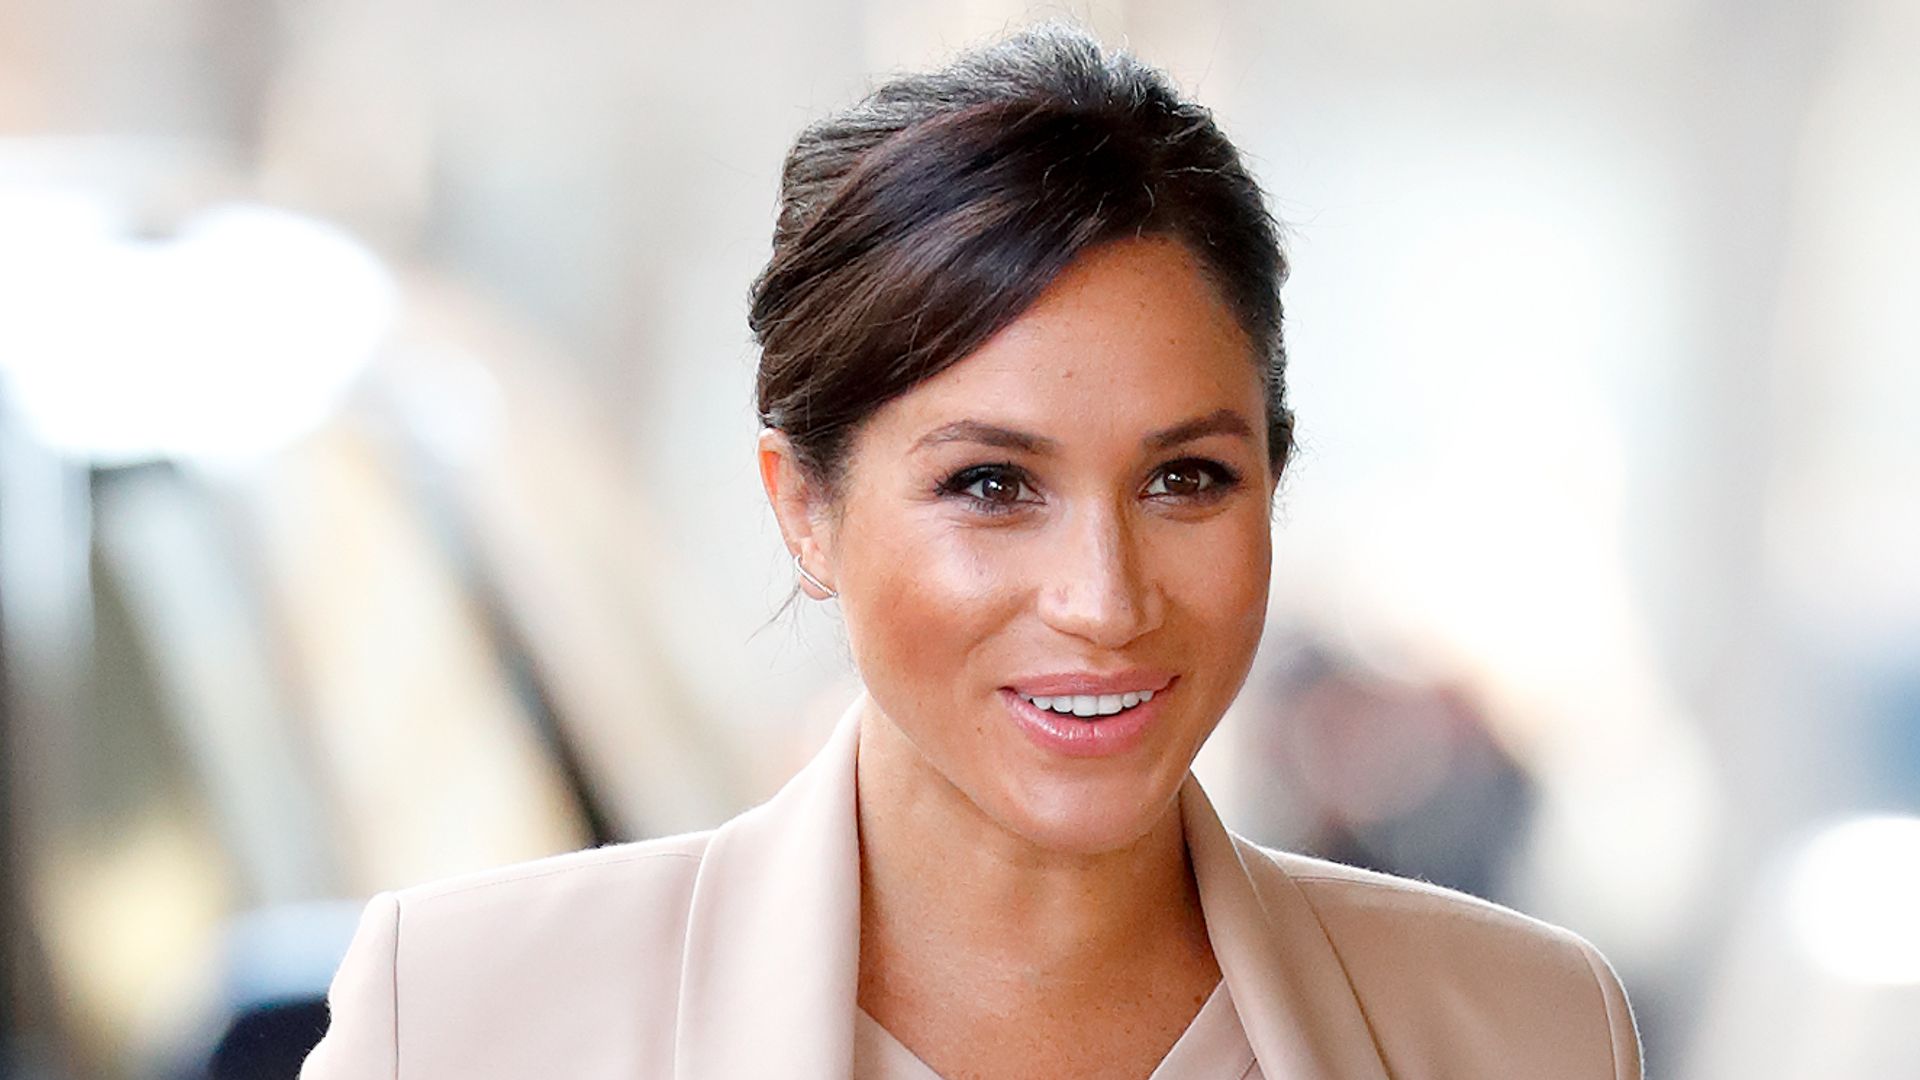 Meghan Markle wears pink beige blazer and dress in 2019 to visit The National Theatre